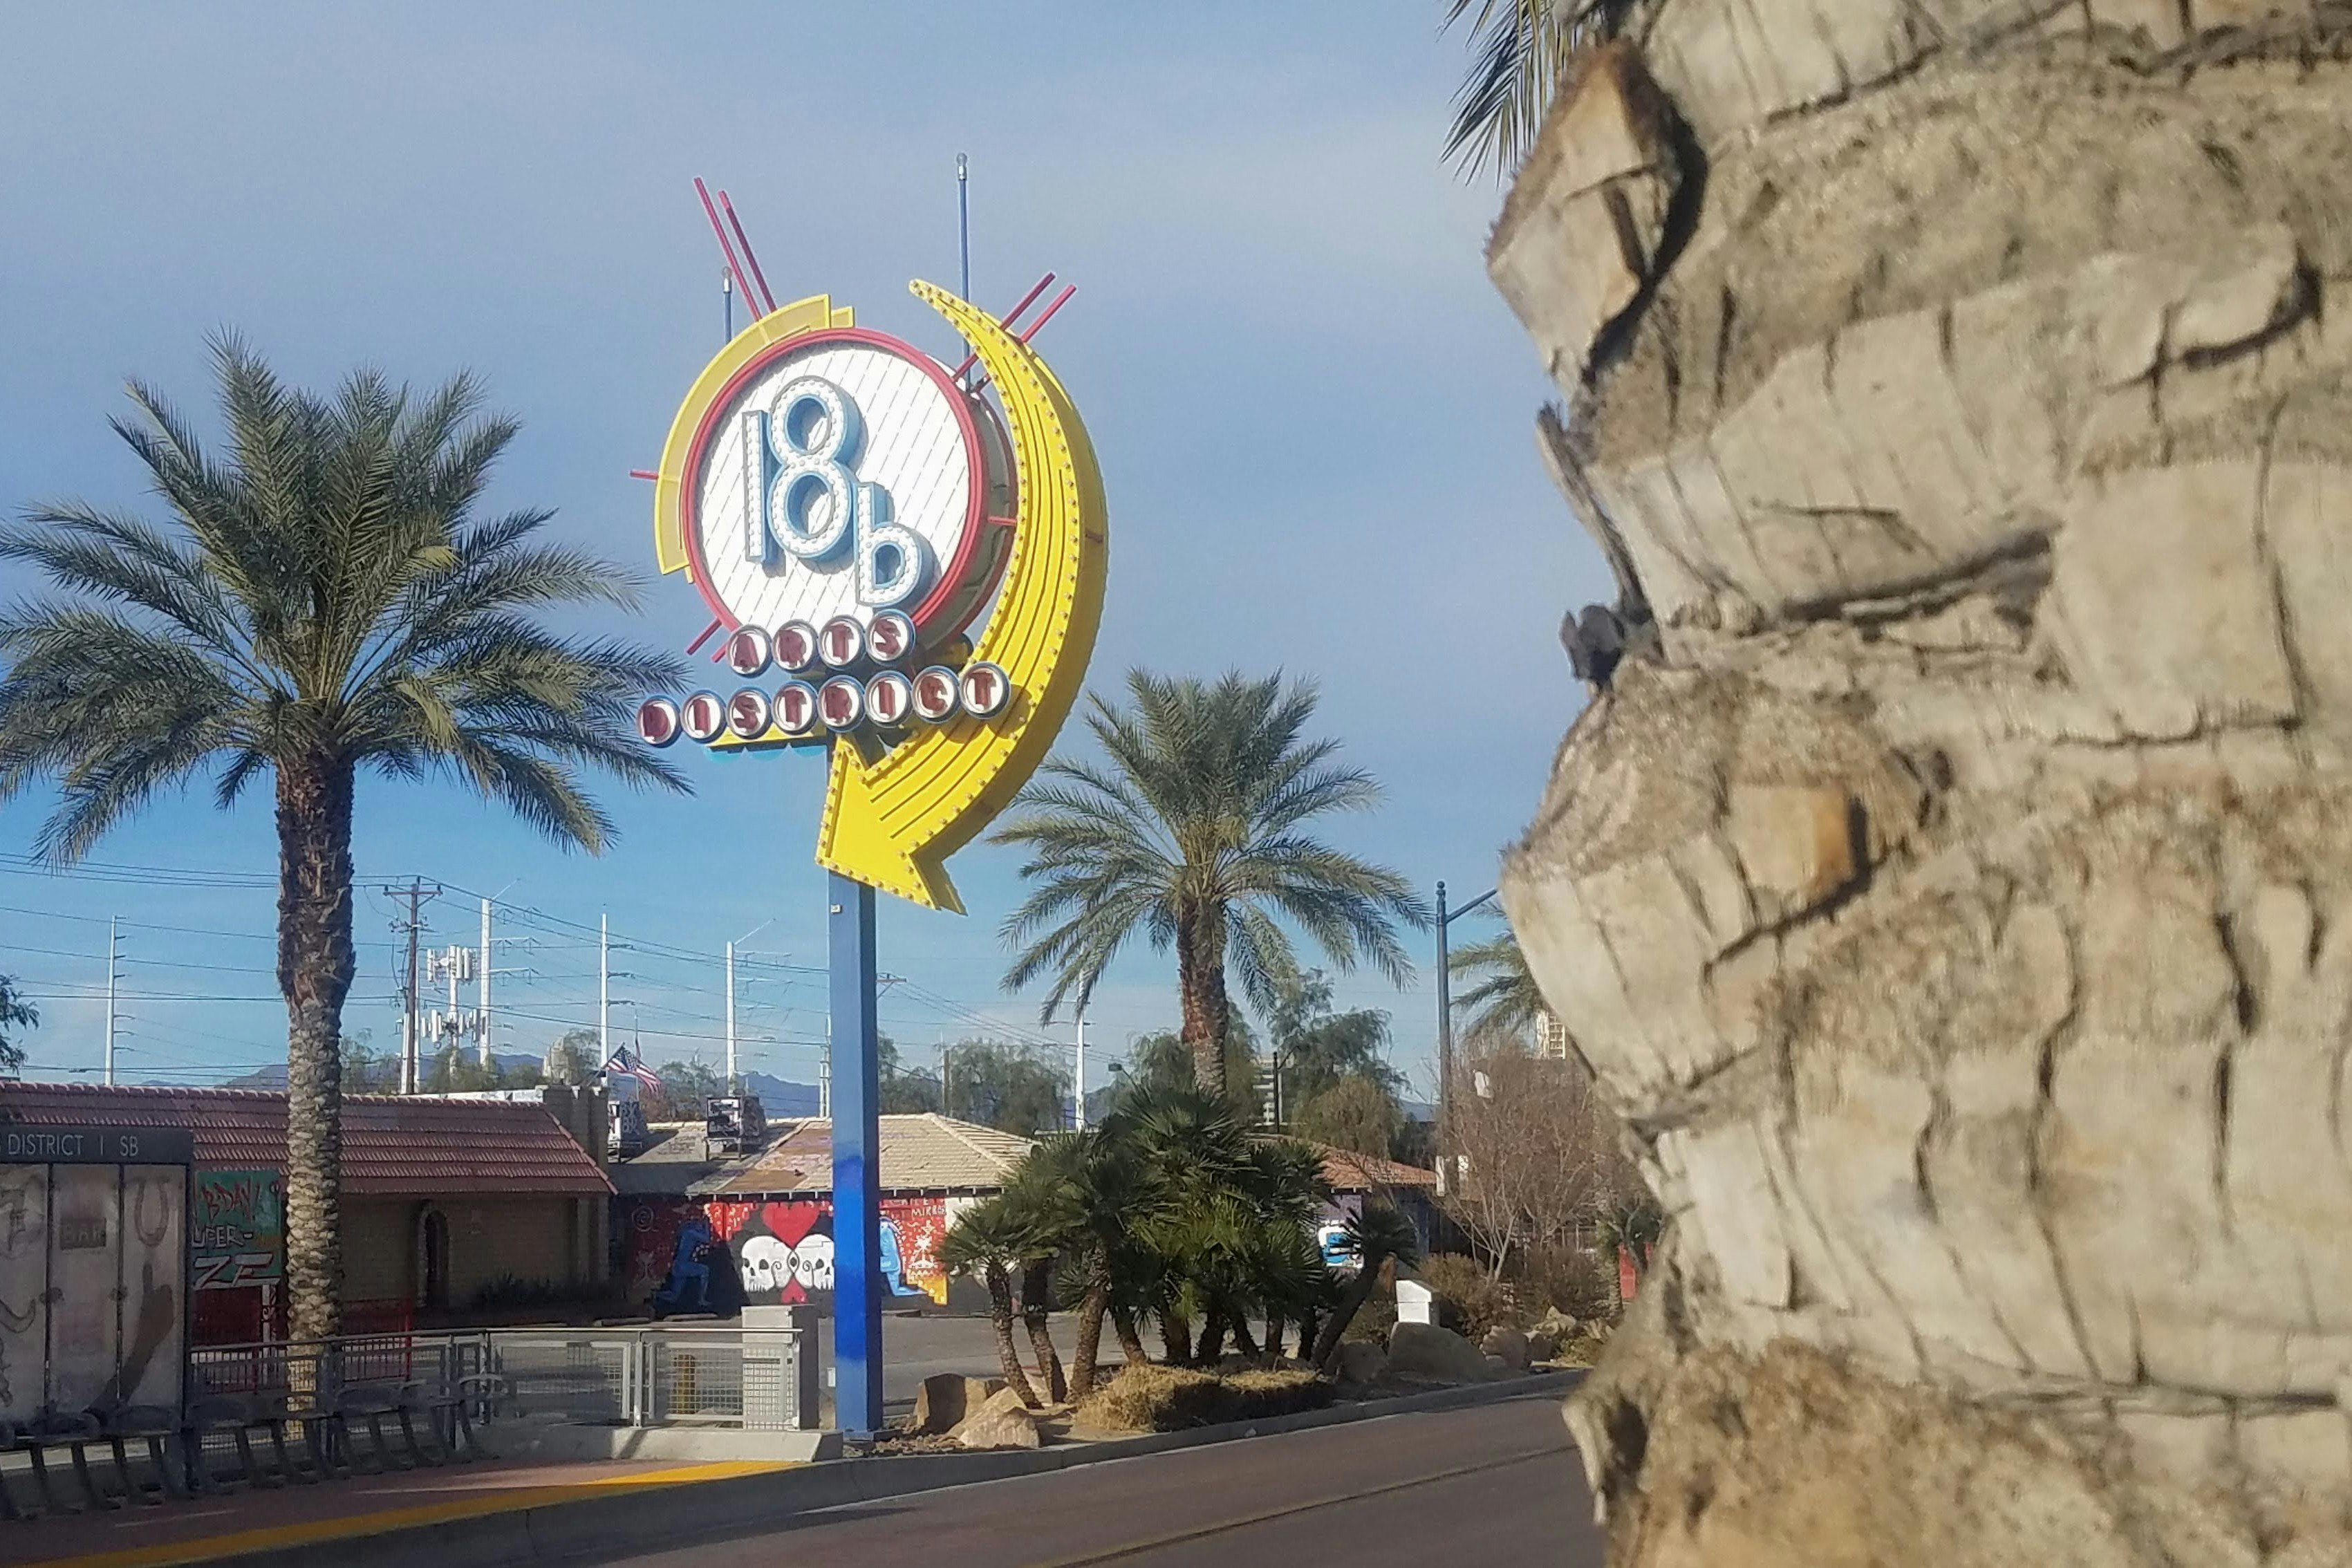 A tall sign, reminiscent of a lollypop, stands beside a palm tree on a street in Las Vegas; the sign states: 18b Arts District.